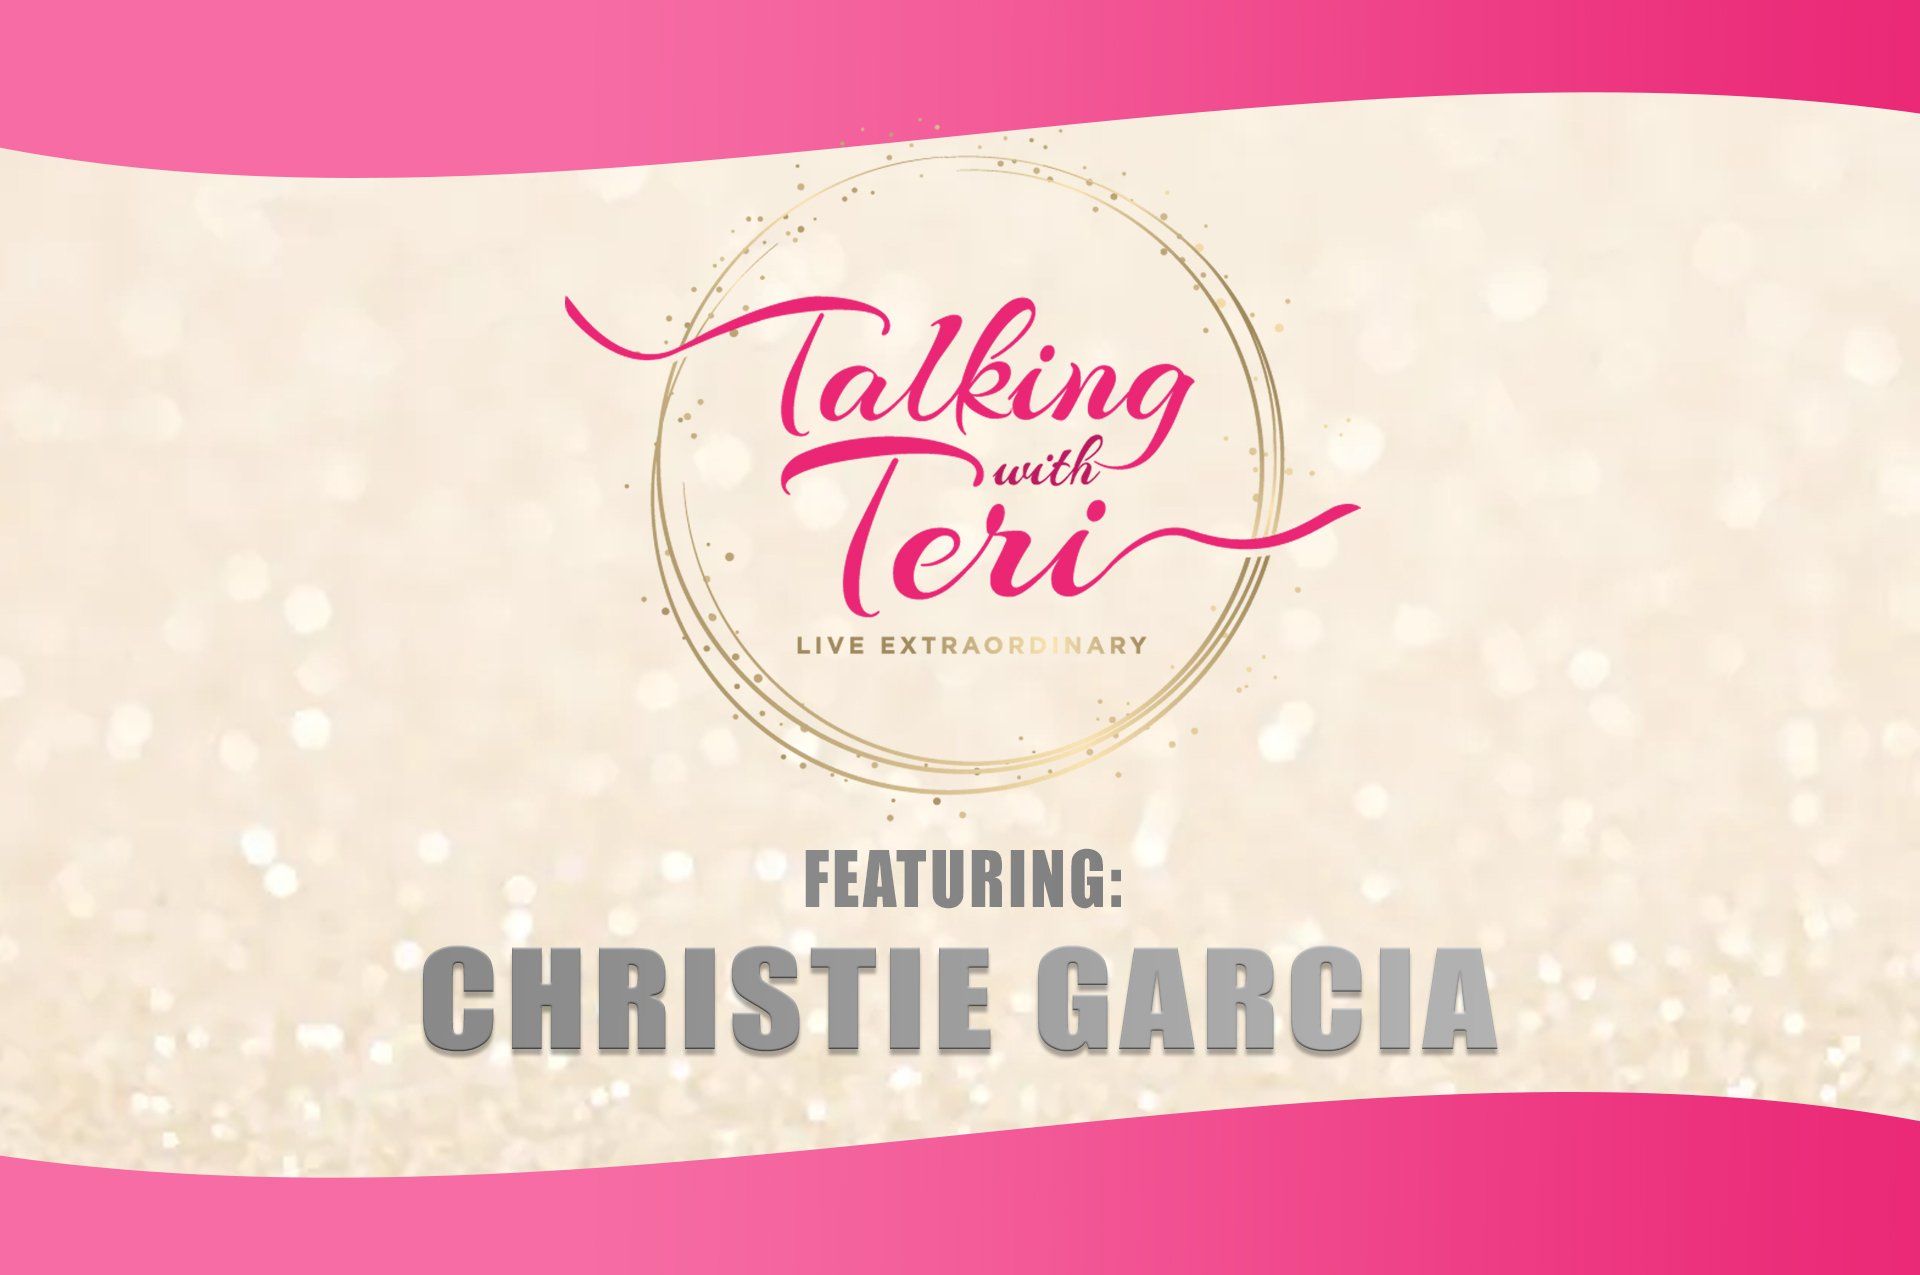 Talking With Teri and Christie Garcia